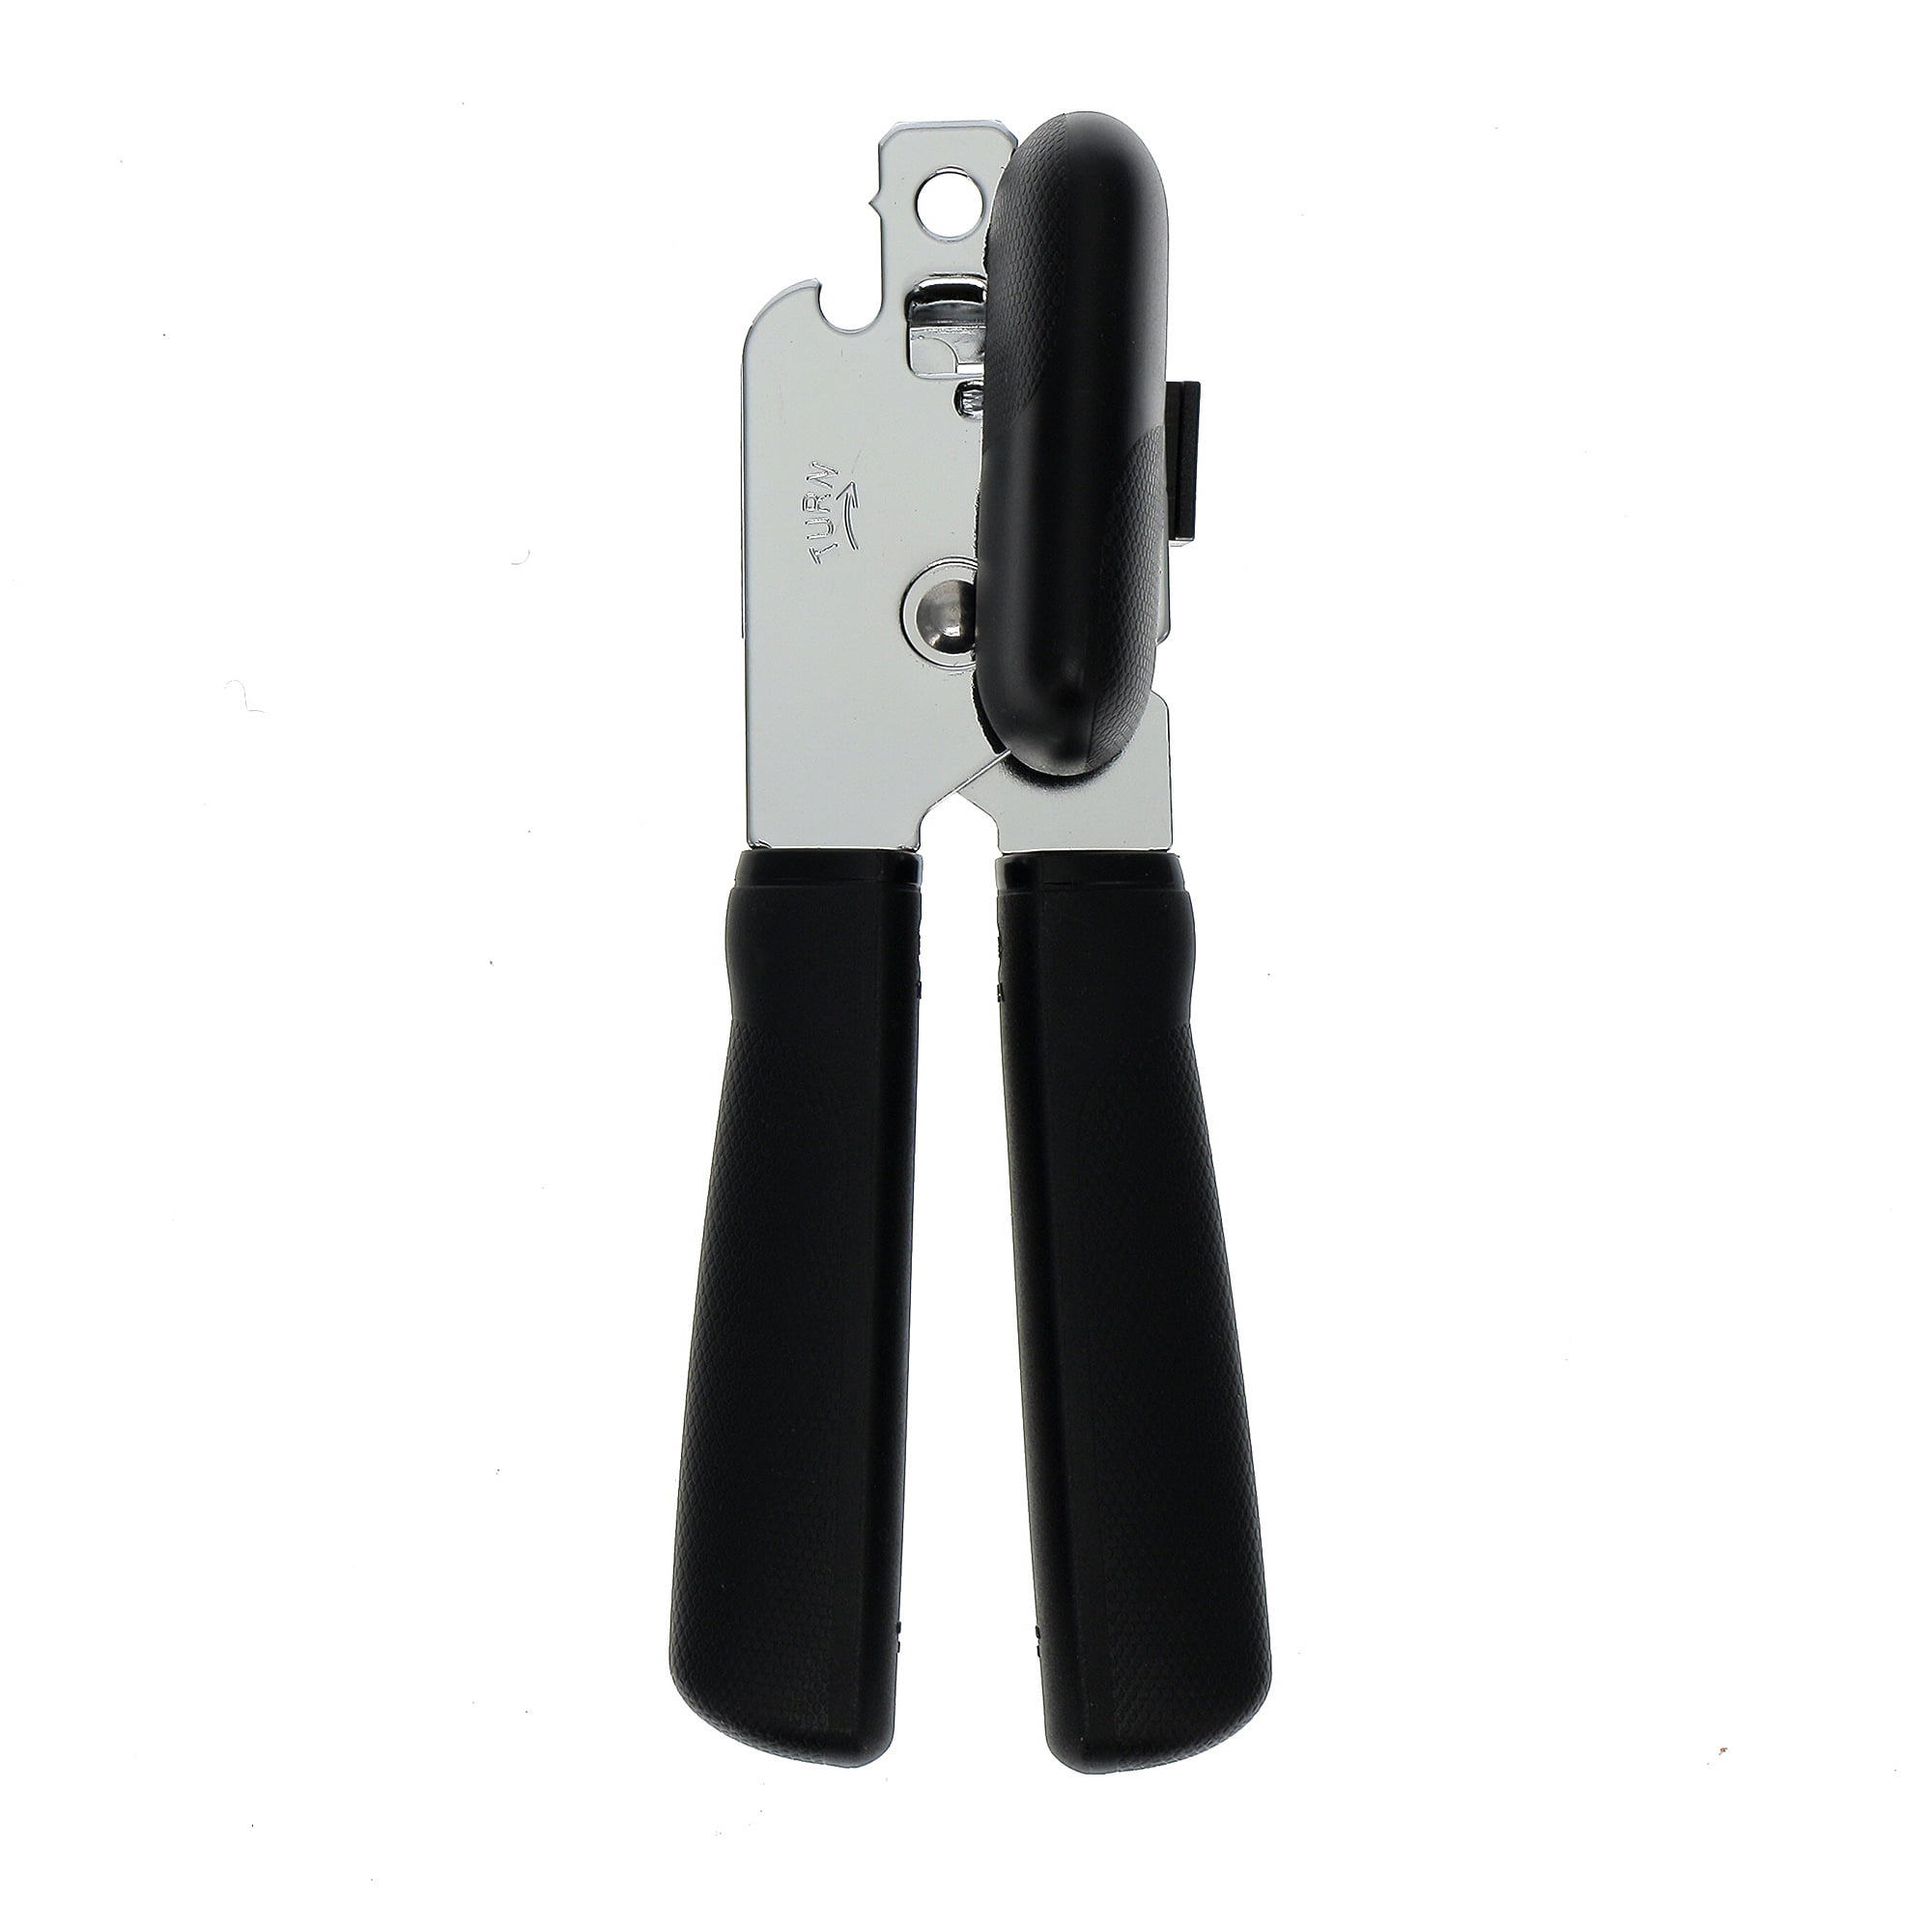 Mainstays Stainless Steel Manual Can Opener with Textured Grip Handles, Black